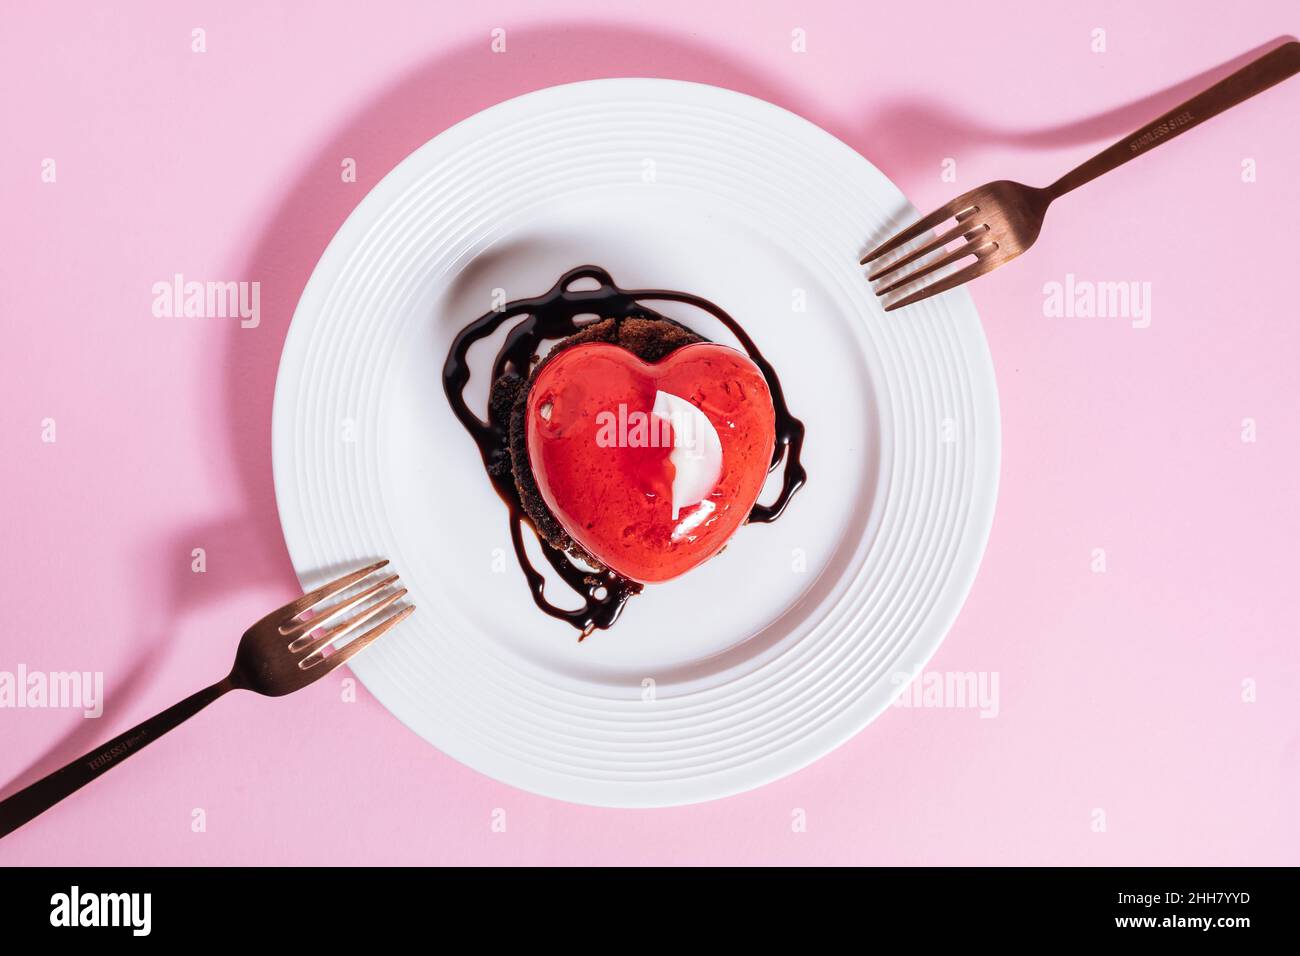 Valentine's day Heart shaped chocolate and strawberry cake. Celebration of love concept. Stock Photo